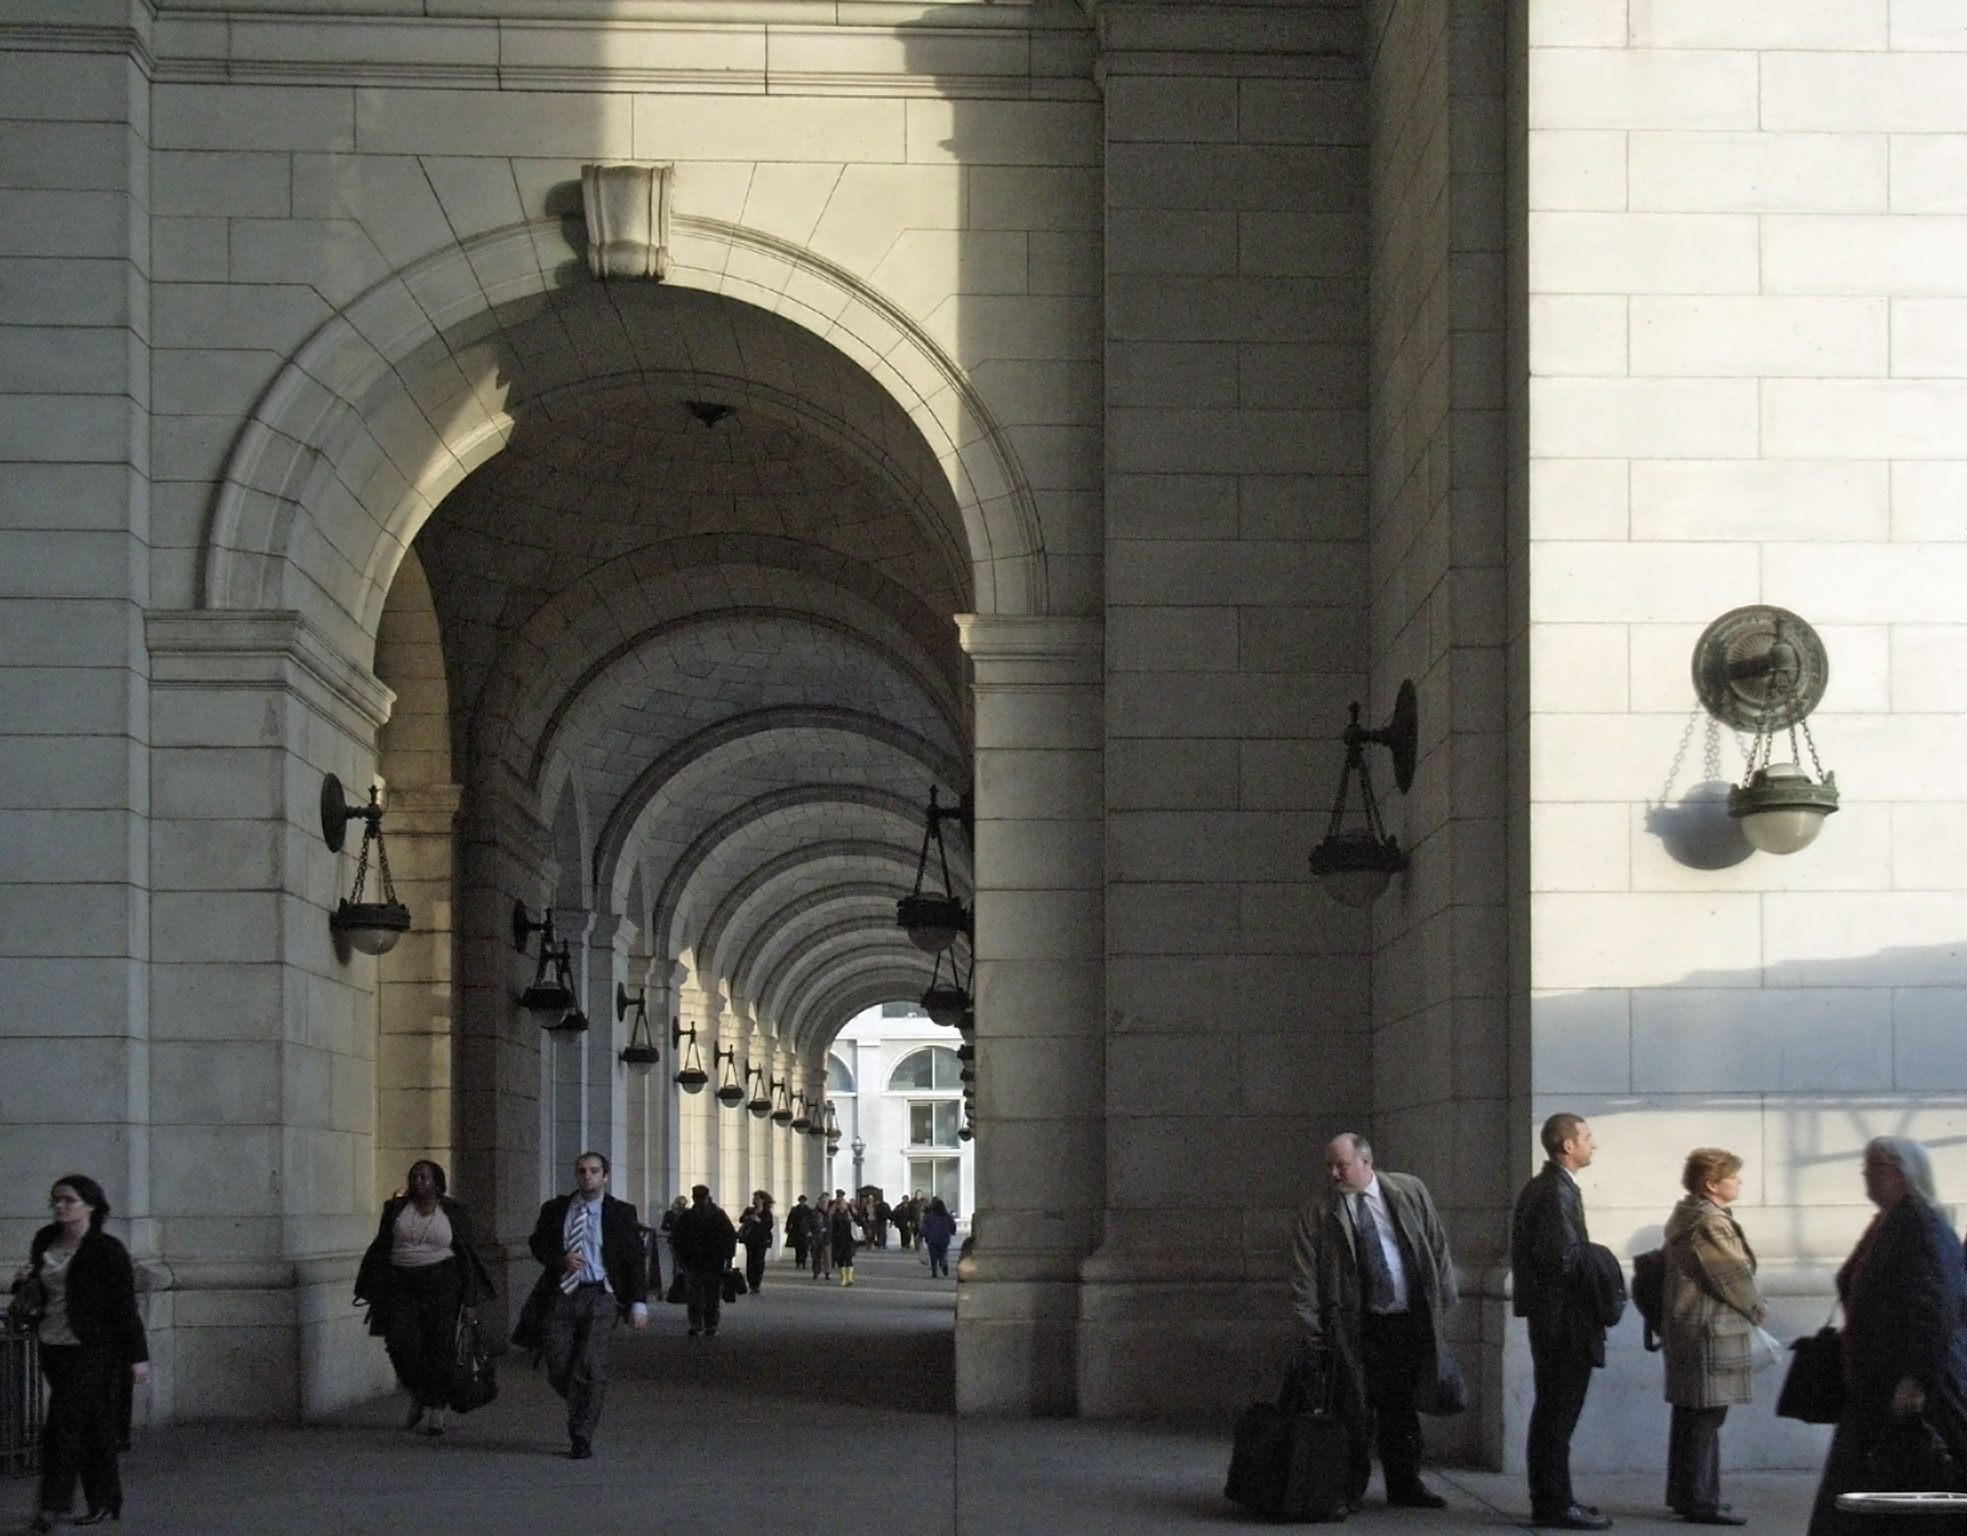 several people are walking down a street with an archway